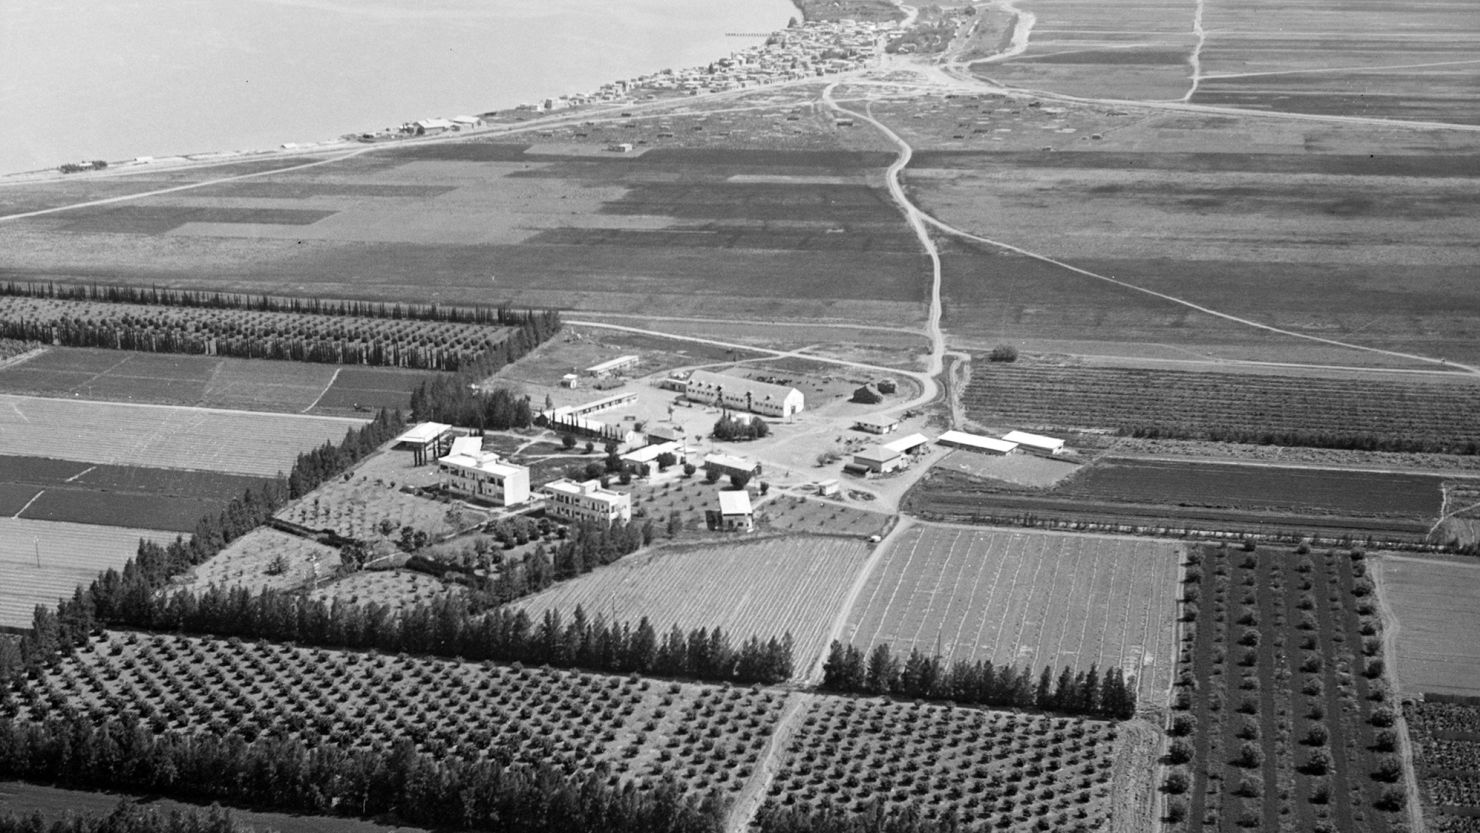 The Deganya kibbutz is seen in this photograph from 1912.